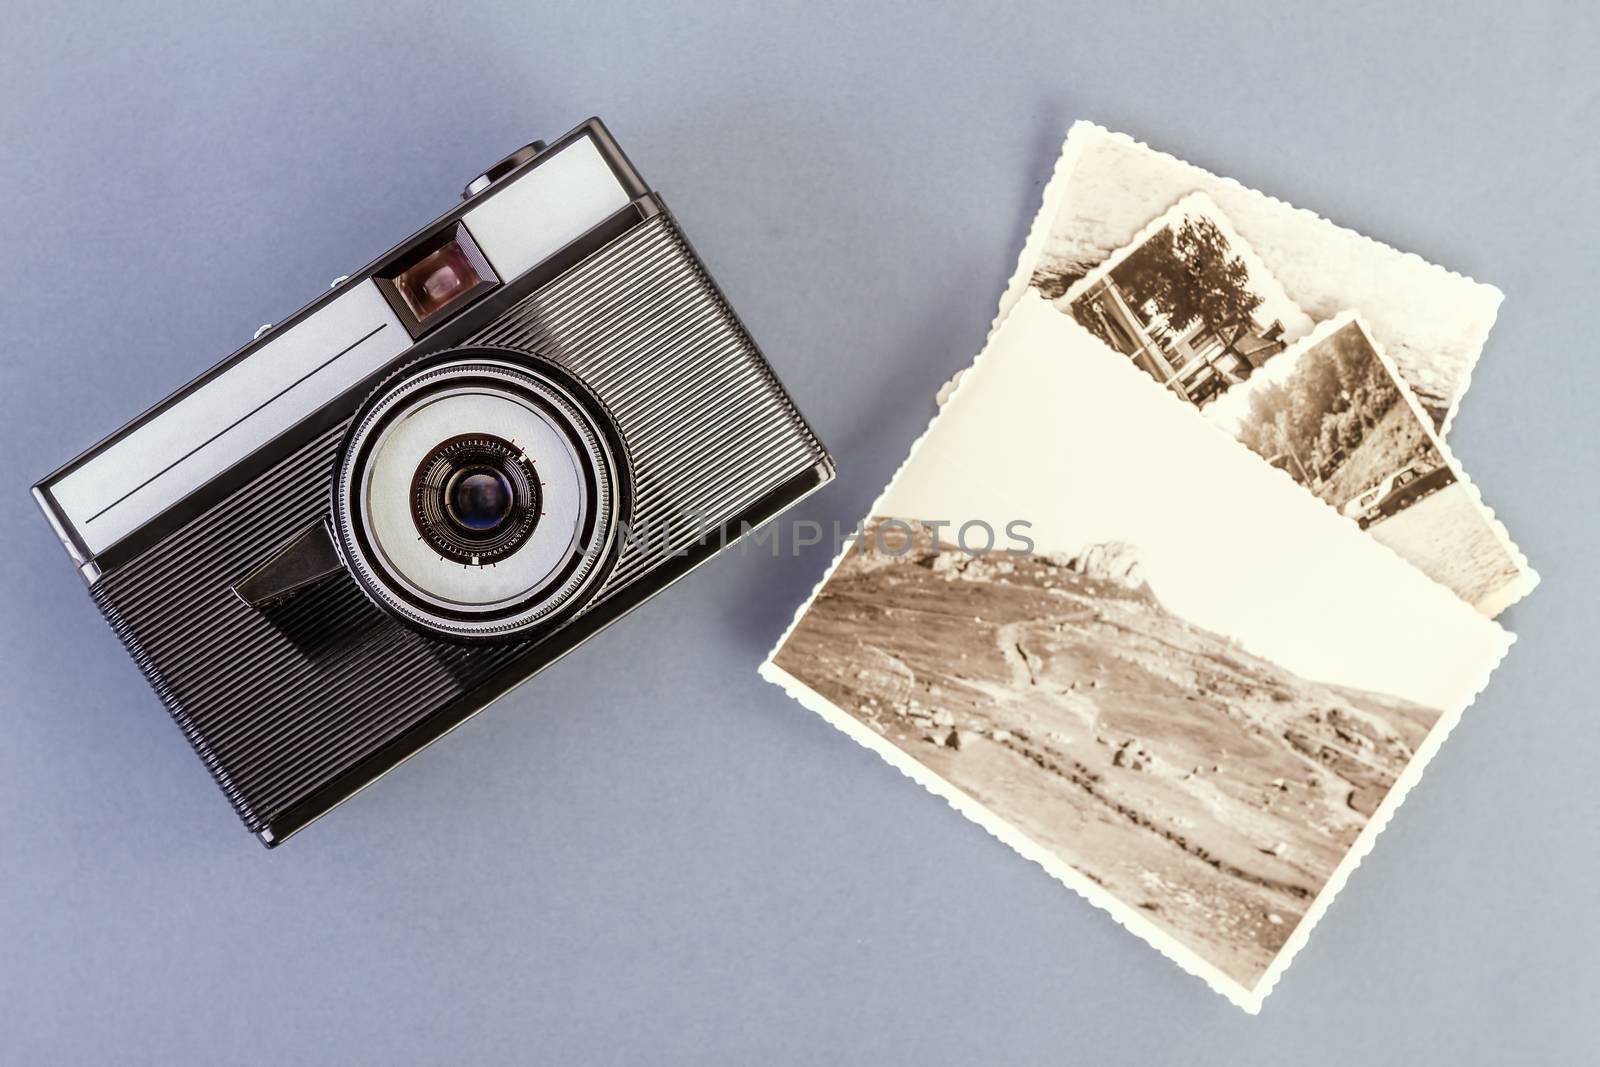 Vintage photo camera and old photos on a gray table